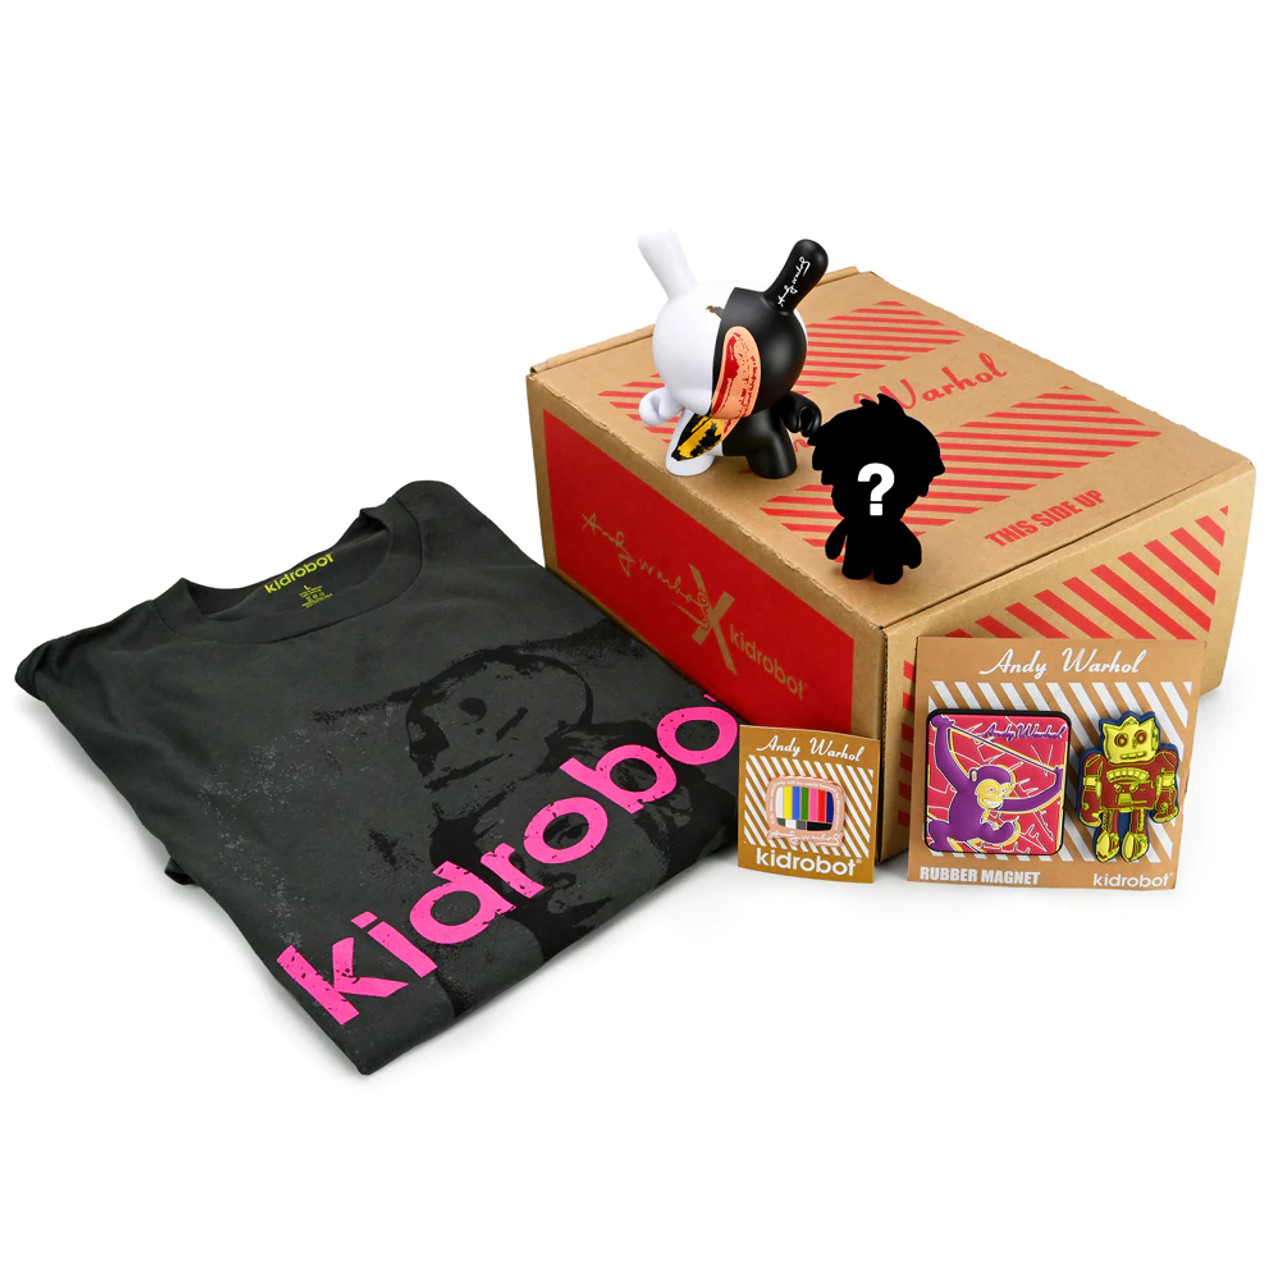 Warhol Pop Art Collection Dunny Box One